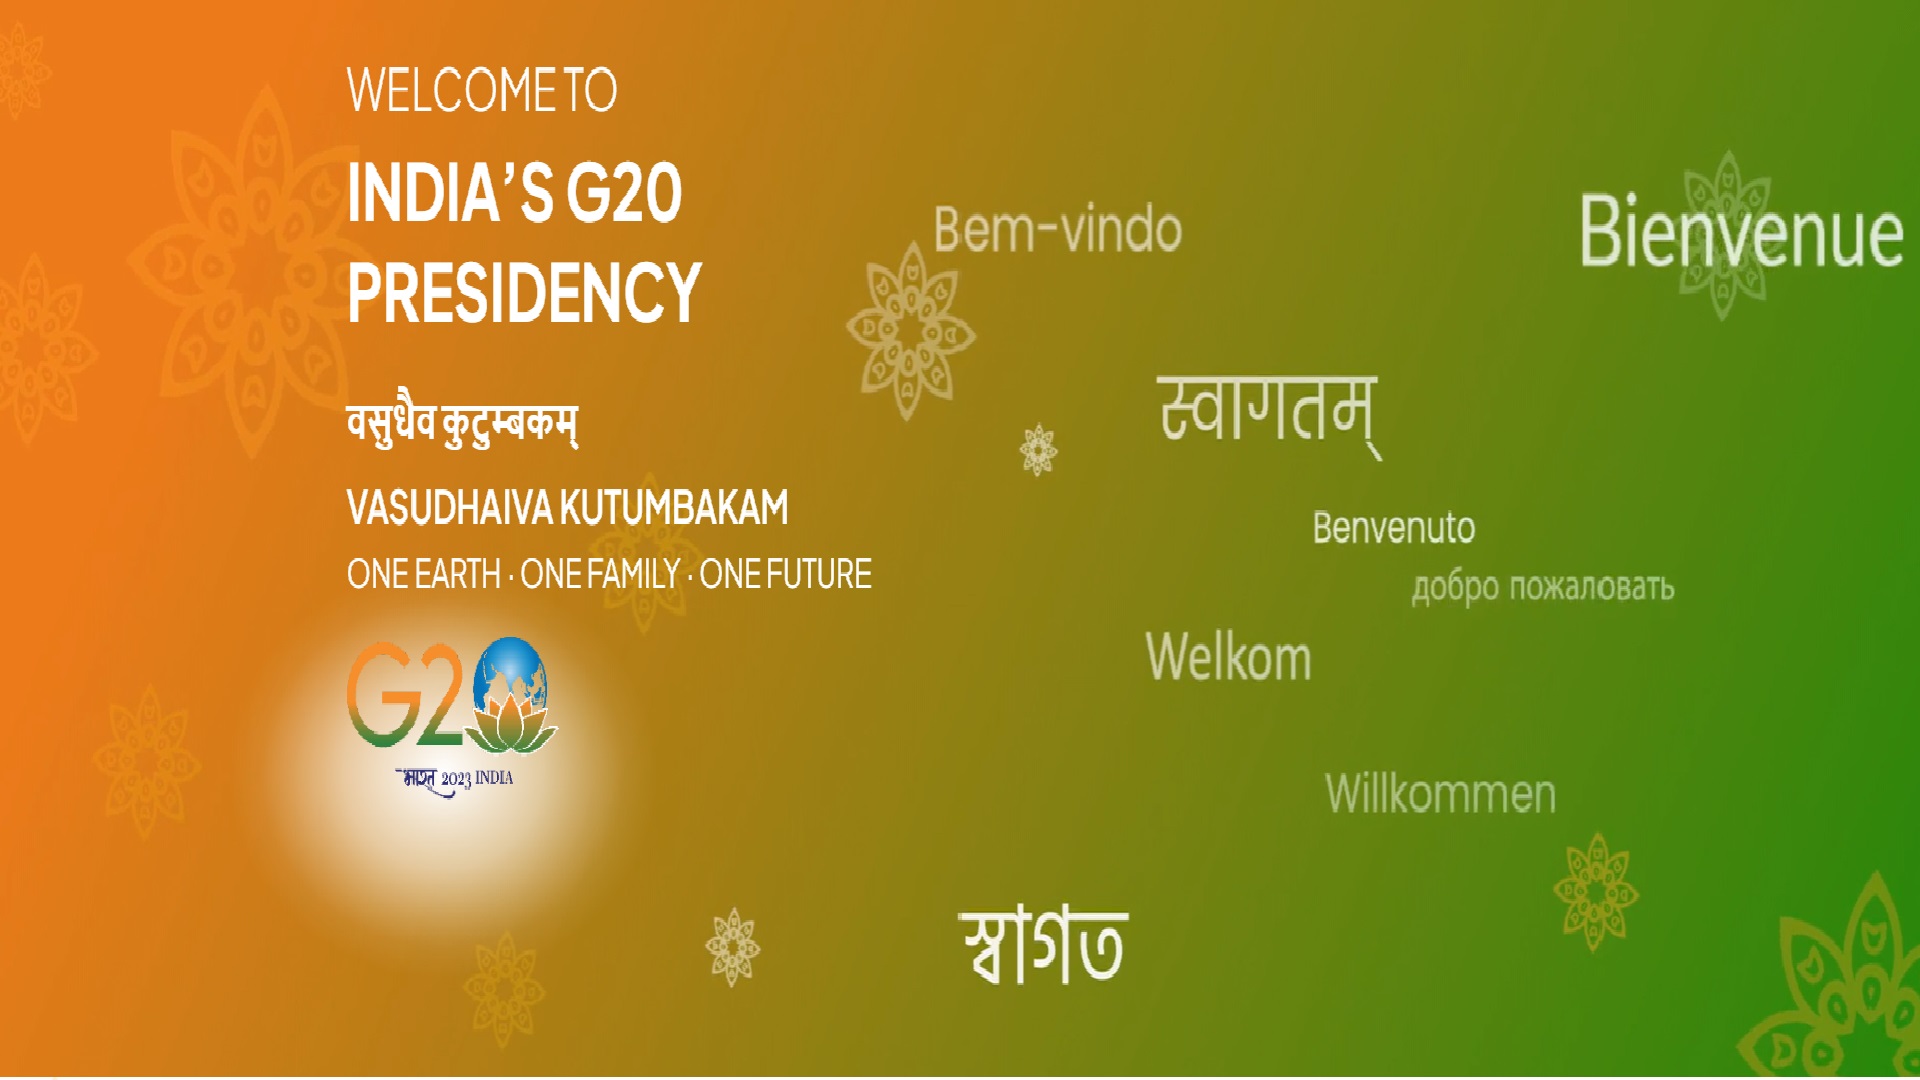 As you are aware India has taken over G20 Presidency